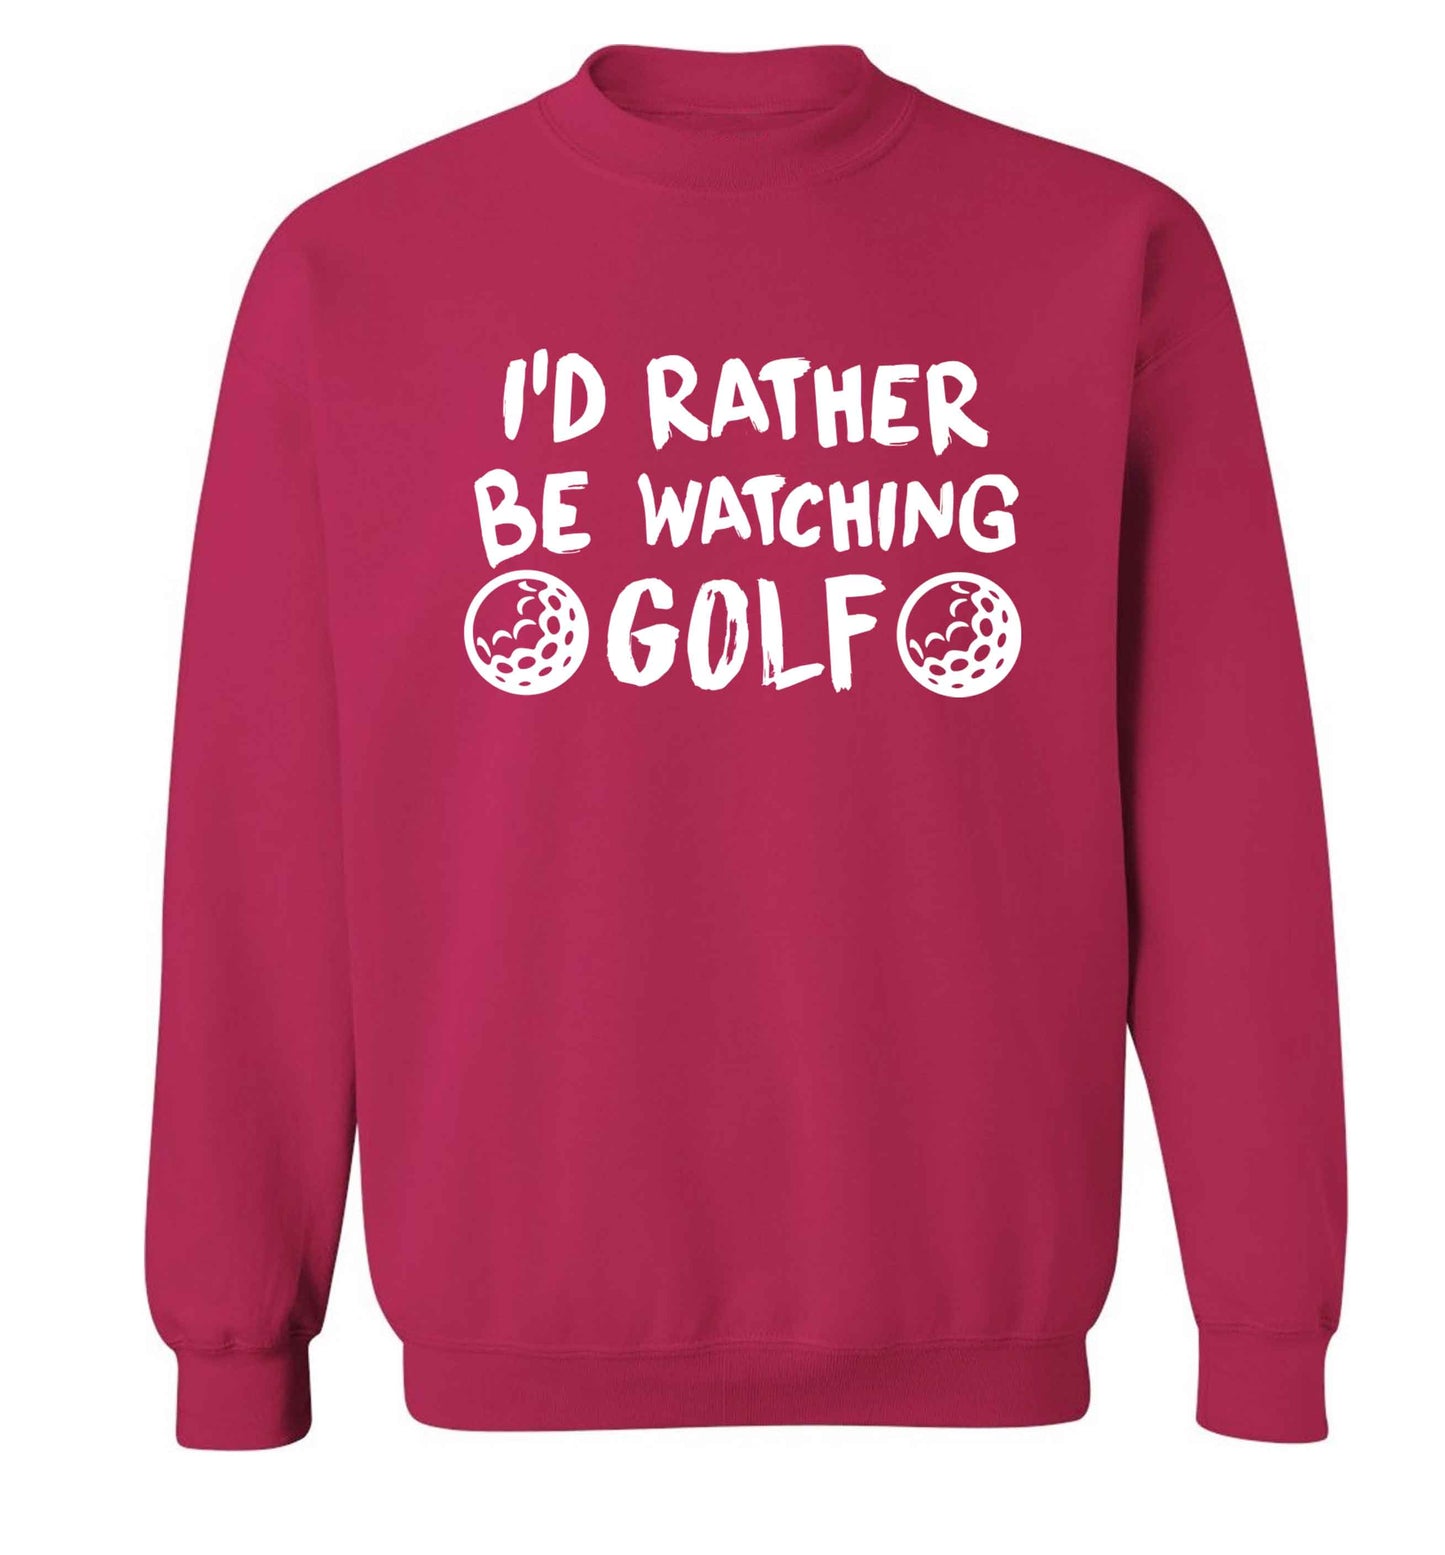 I'd rather be watching golf Adult's unisex pink Sweater 2XL